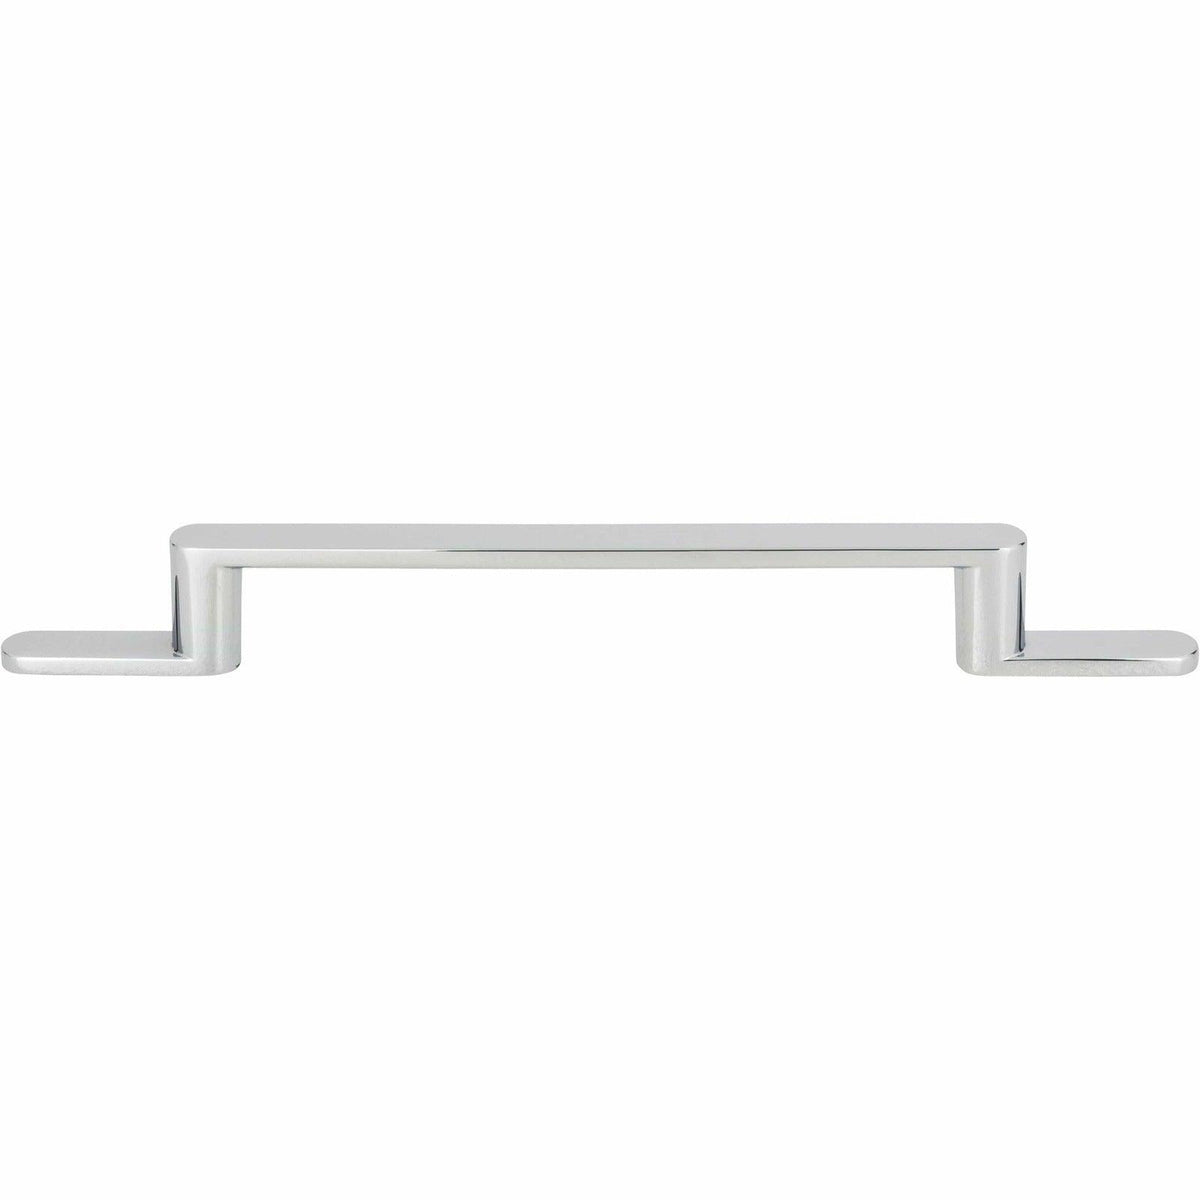 Atlas Homewares - Alaire Pull - A503-CH | Montreal Lighting & Hardware